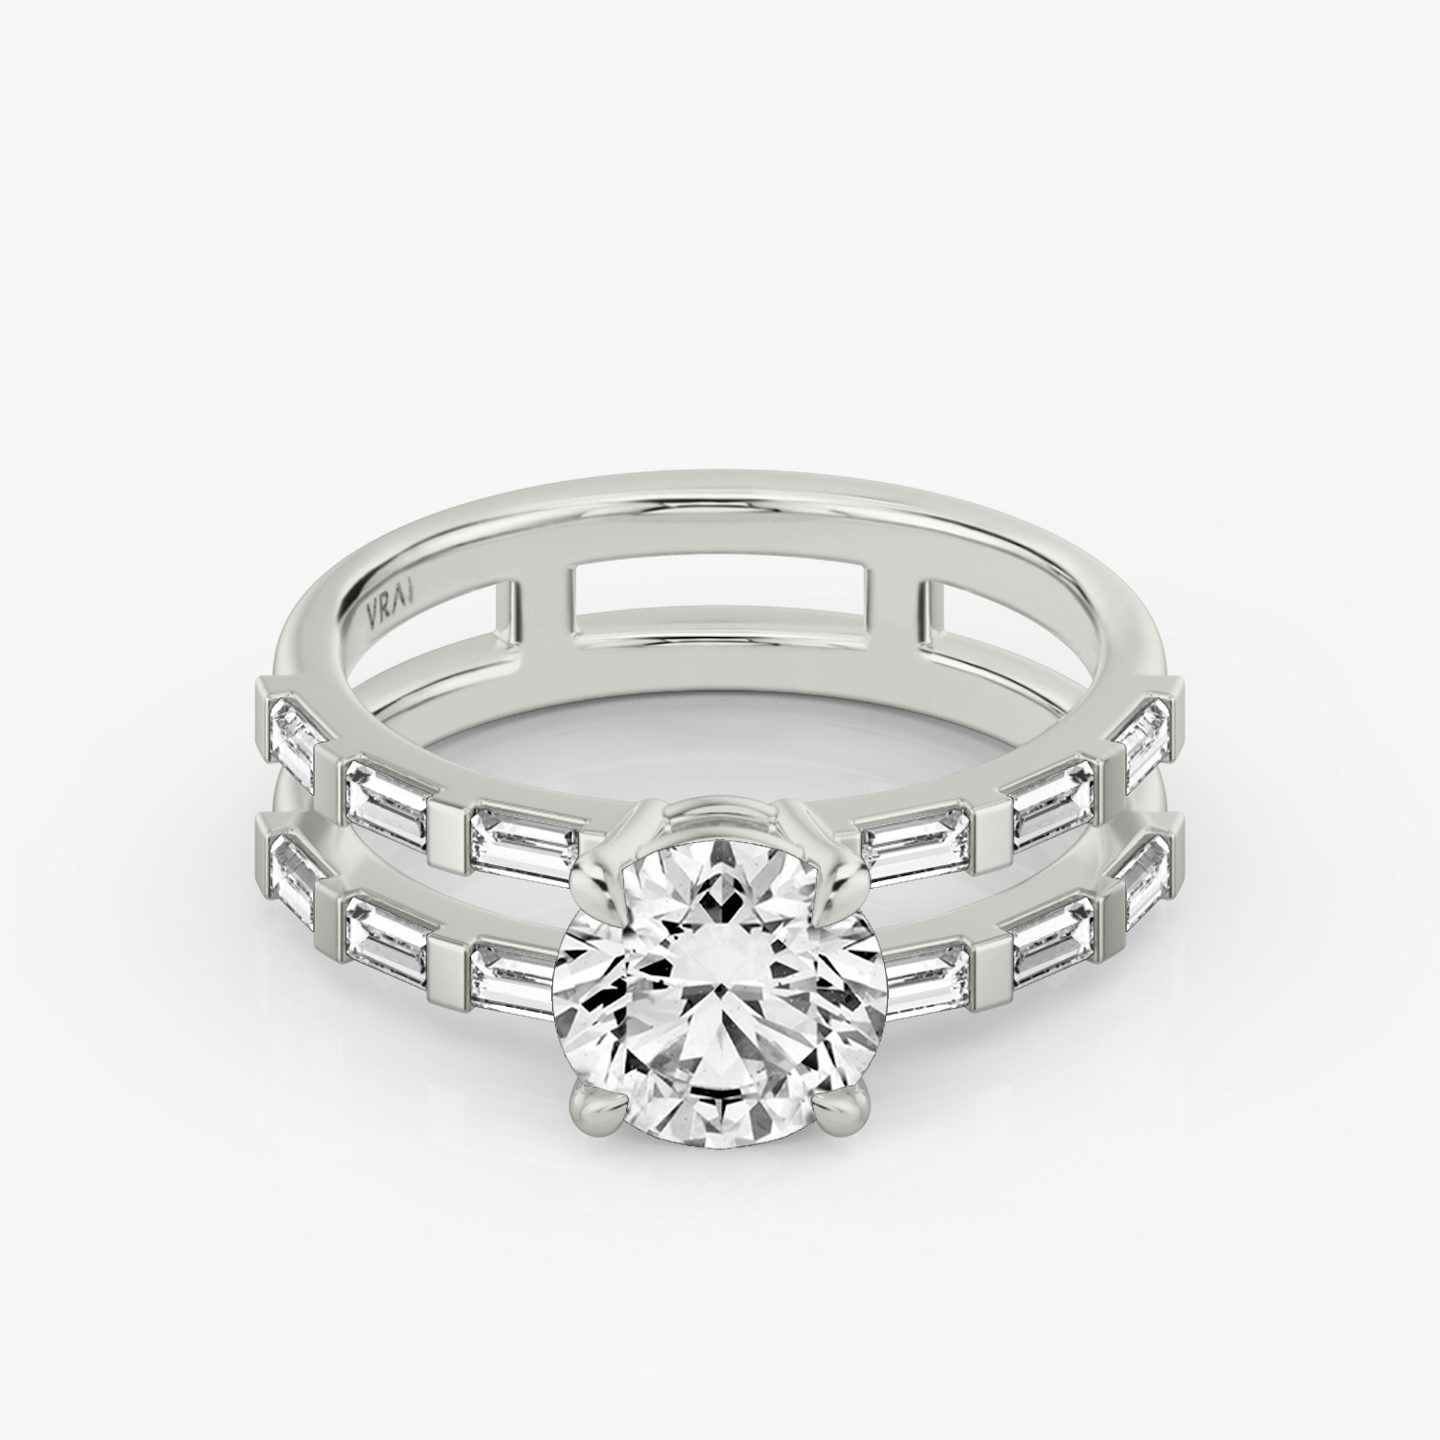 The Double Band | Round Brilliant | 18k | 18k White Gold | Band: Pavé | Carat weight: 1 | Band stone shape: Baguette | Diamond orientation: vertical